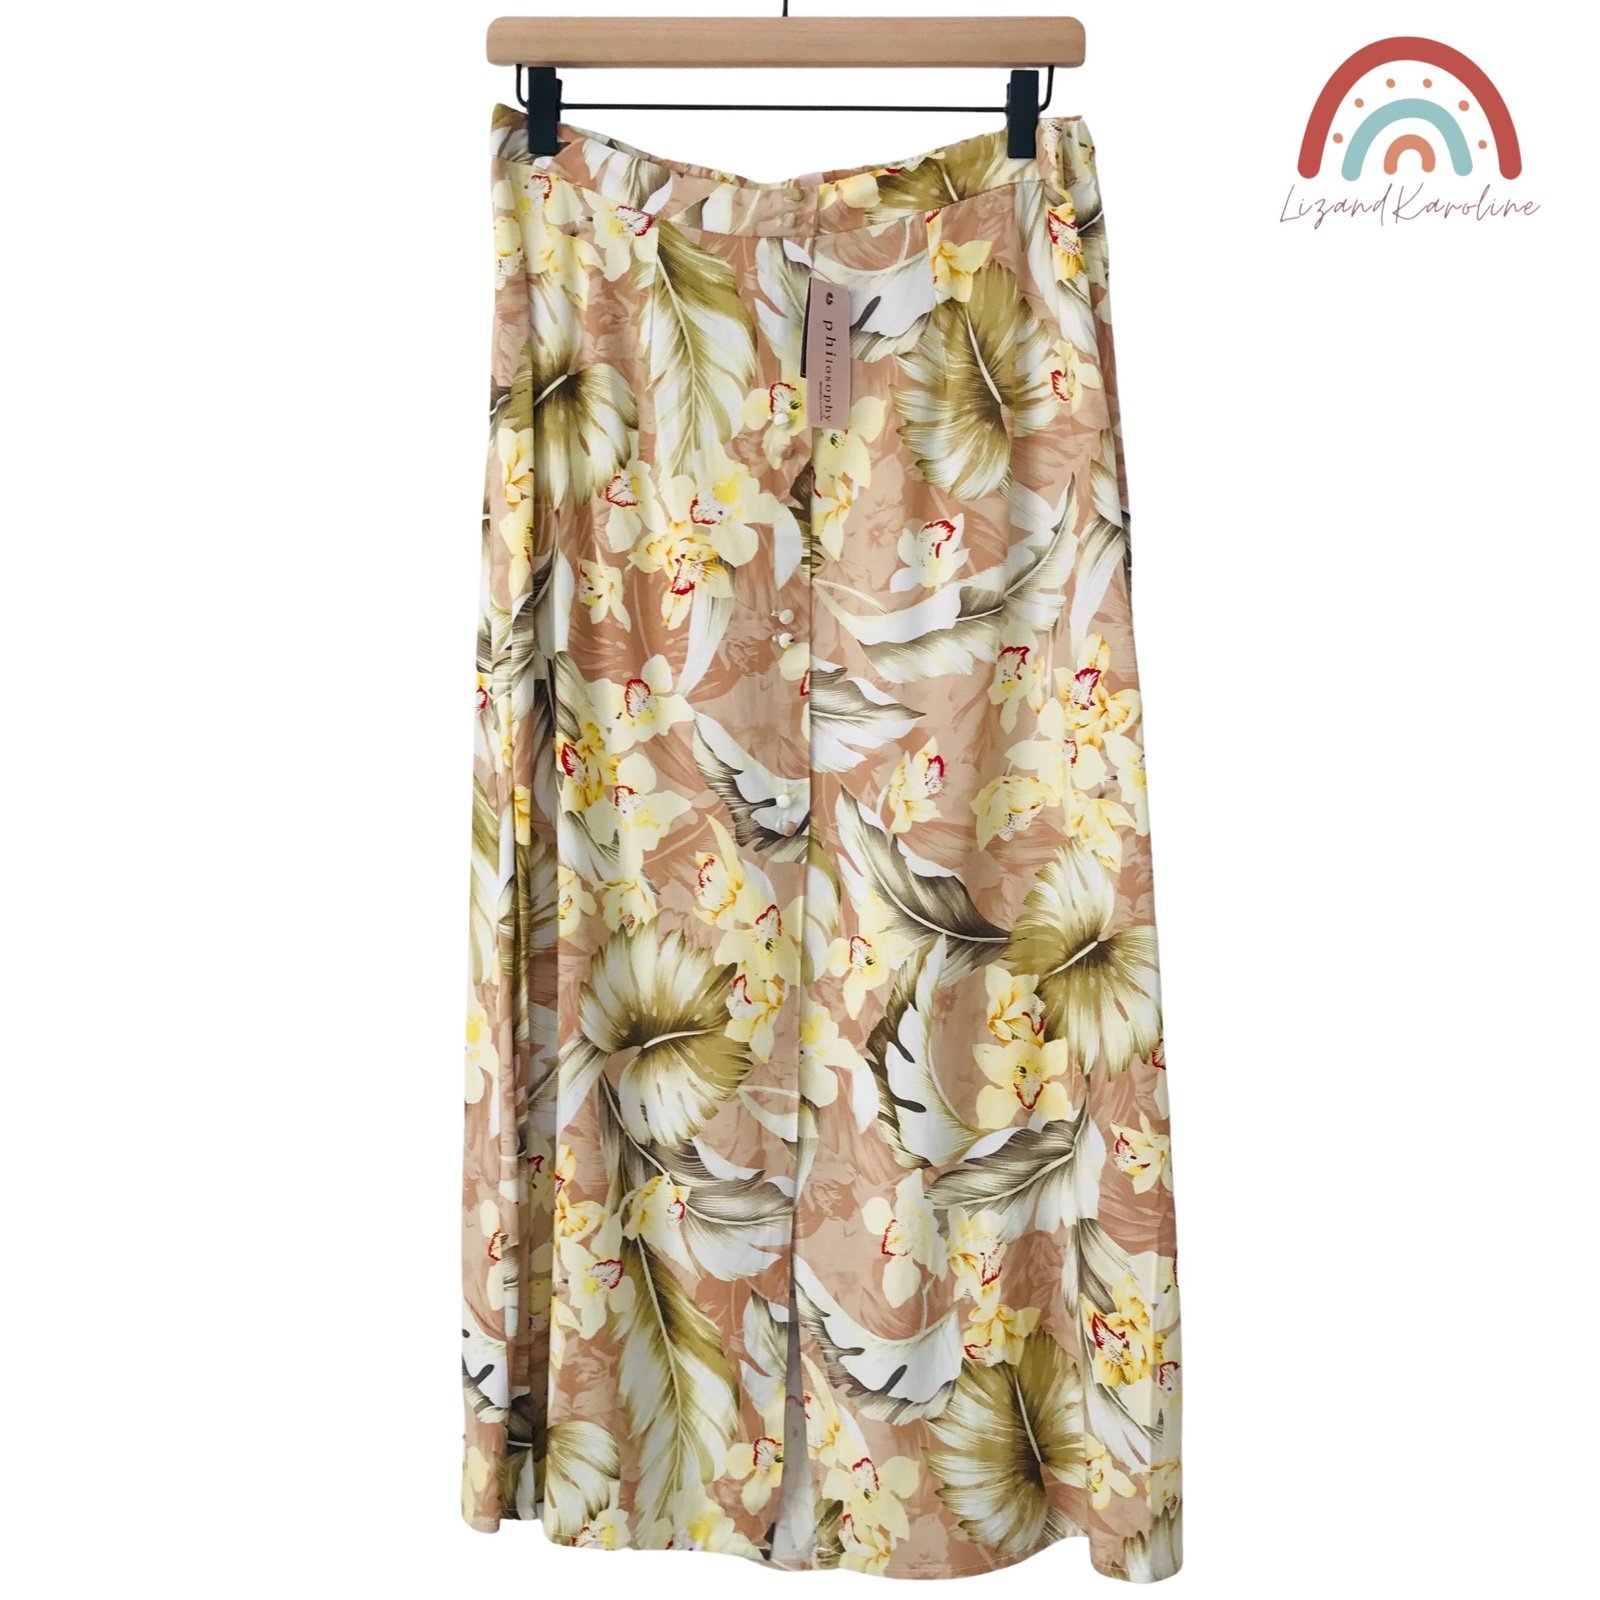 Classic New! Philosophy Tropical Floral Buttoned Down Summer Midi Skirt MoNKdIiHp Cheap